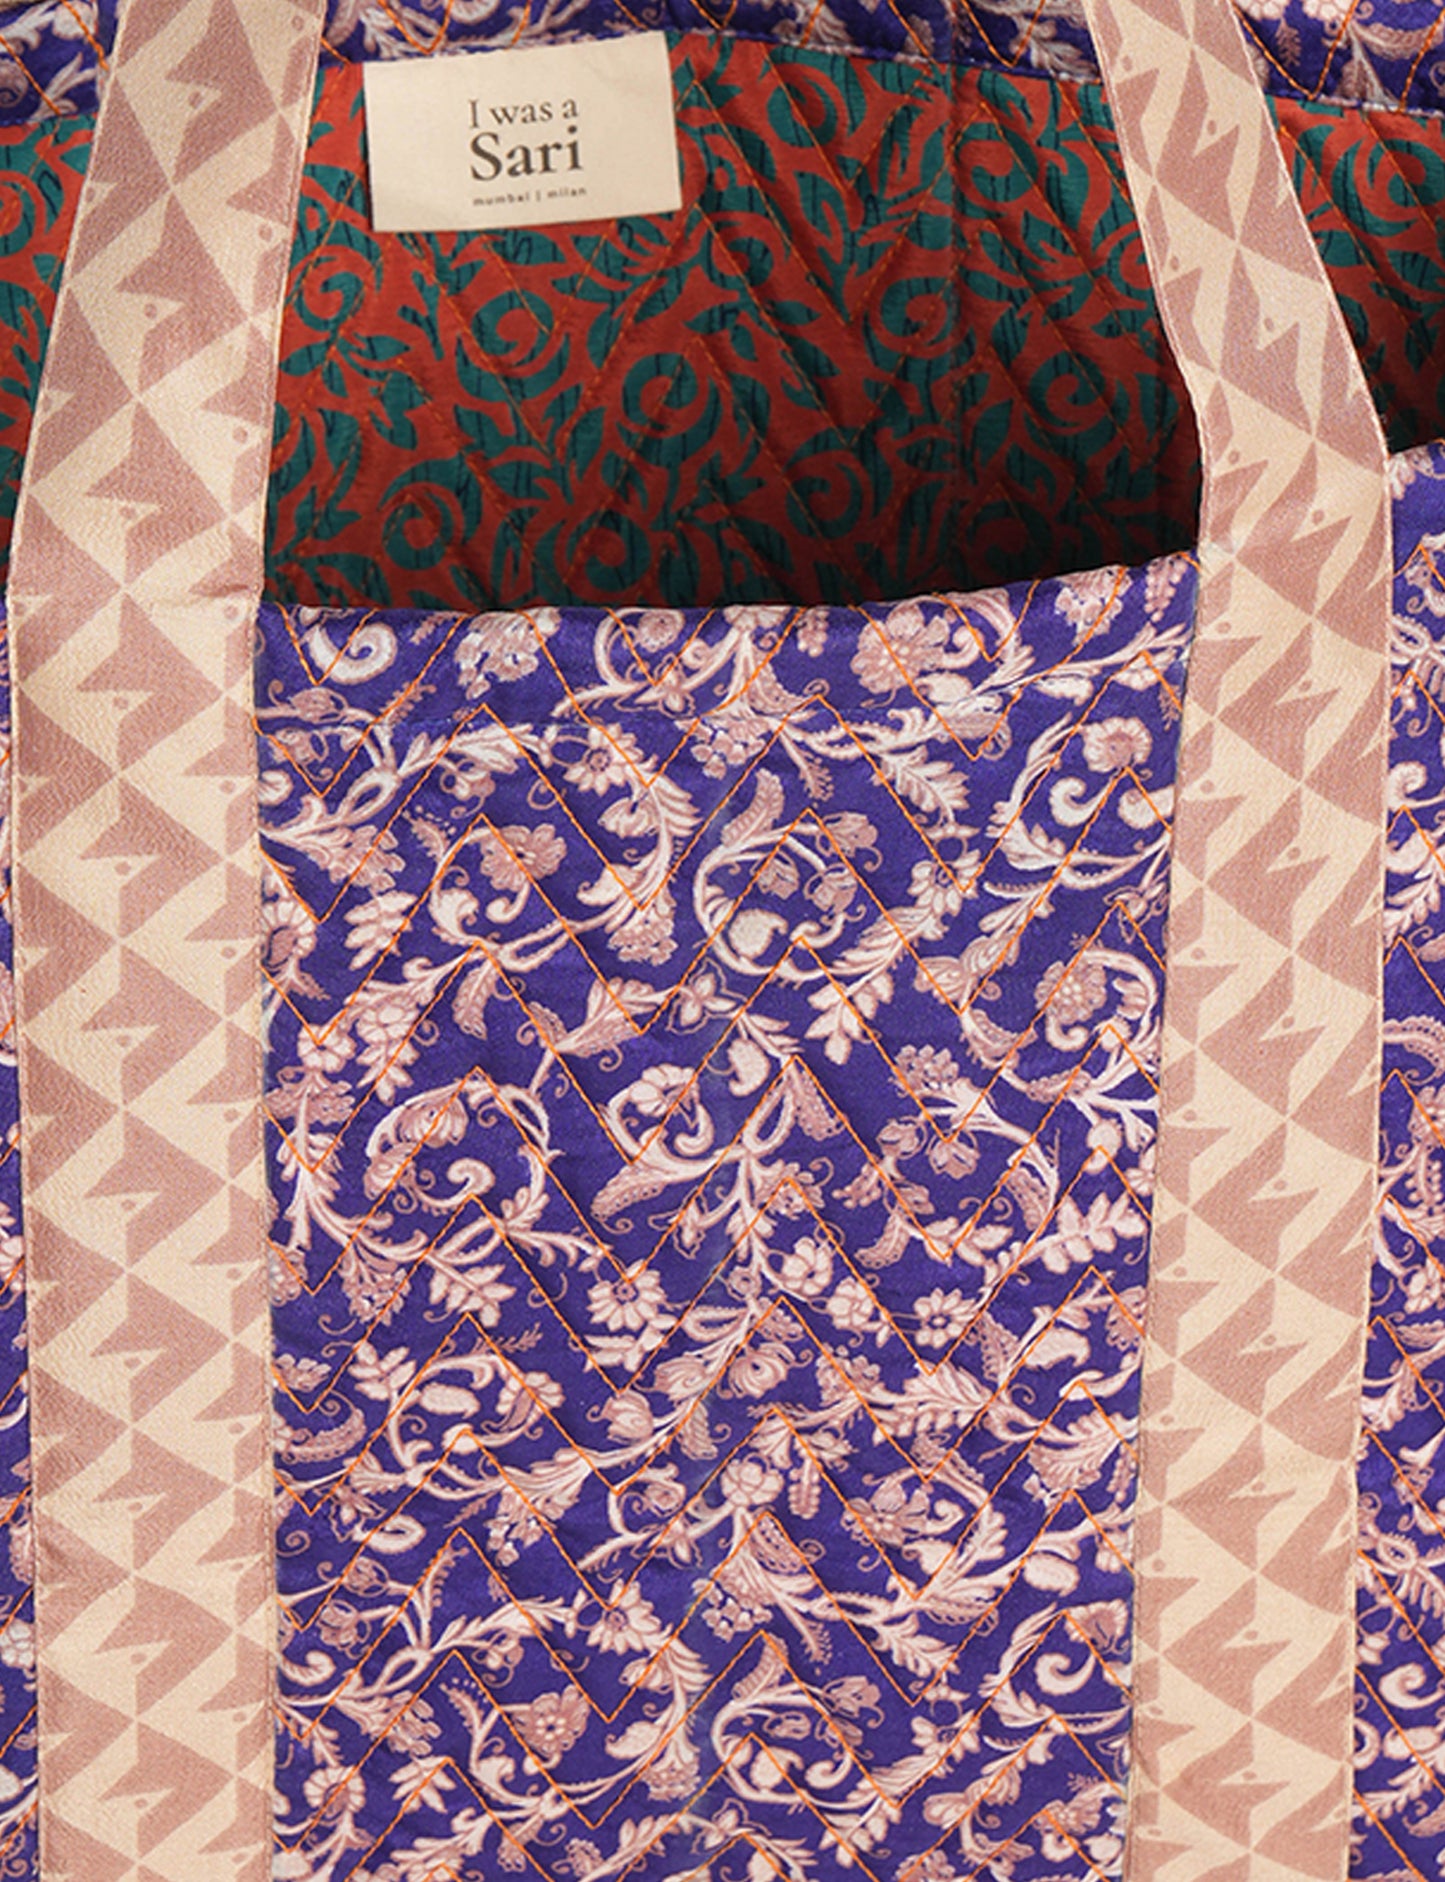 Elevate your style with our Quilted Tote Bag, a perfect fusion of fashion and sustainability. Made from vibrant upcycled saris, the newly quilted design adds strength and softness. With double fabric contrast straps and a unique sari lining, it's a statement of ethical elegance.